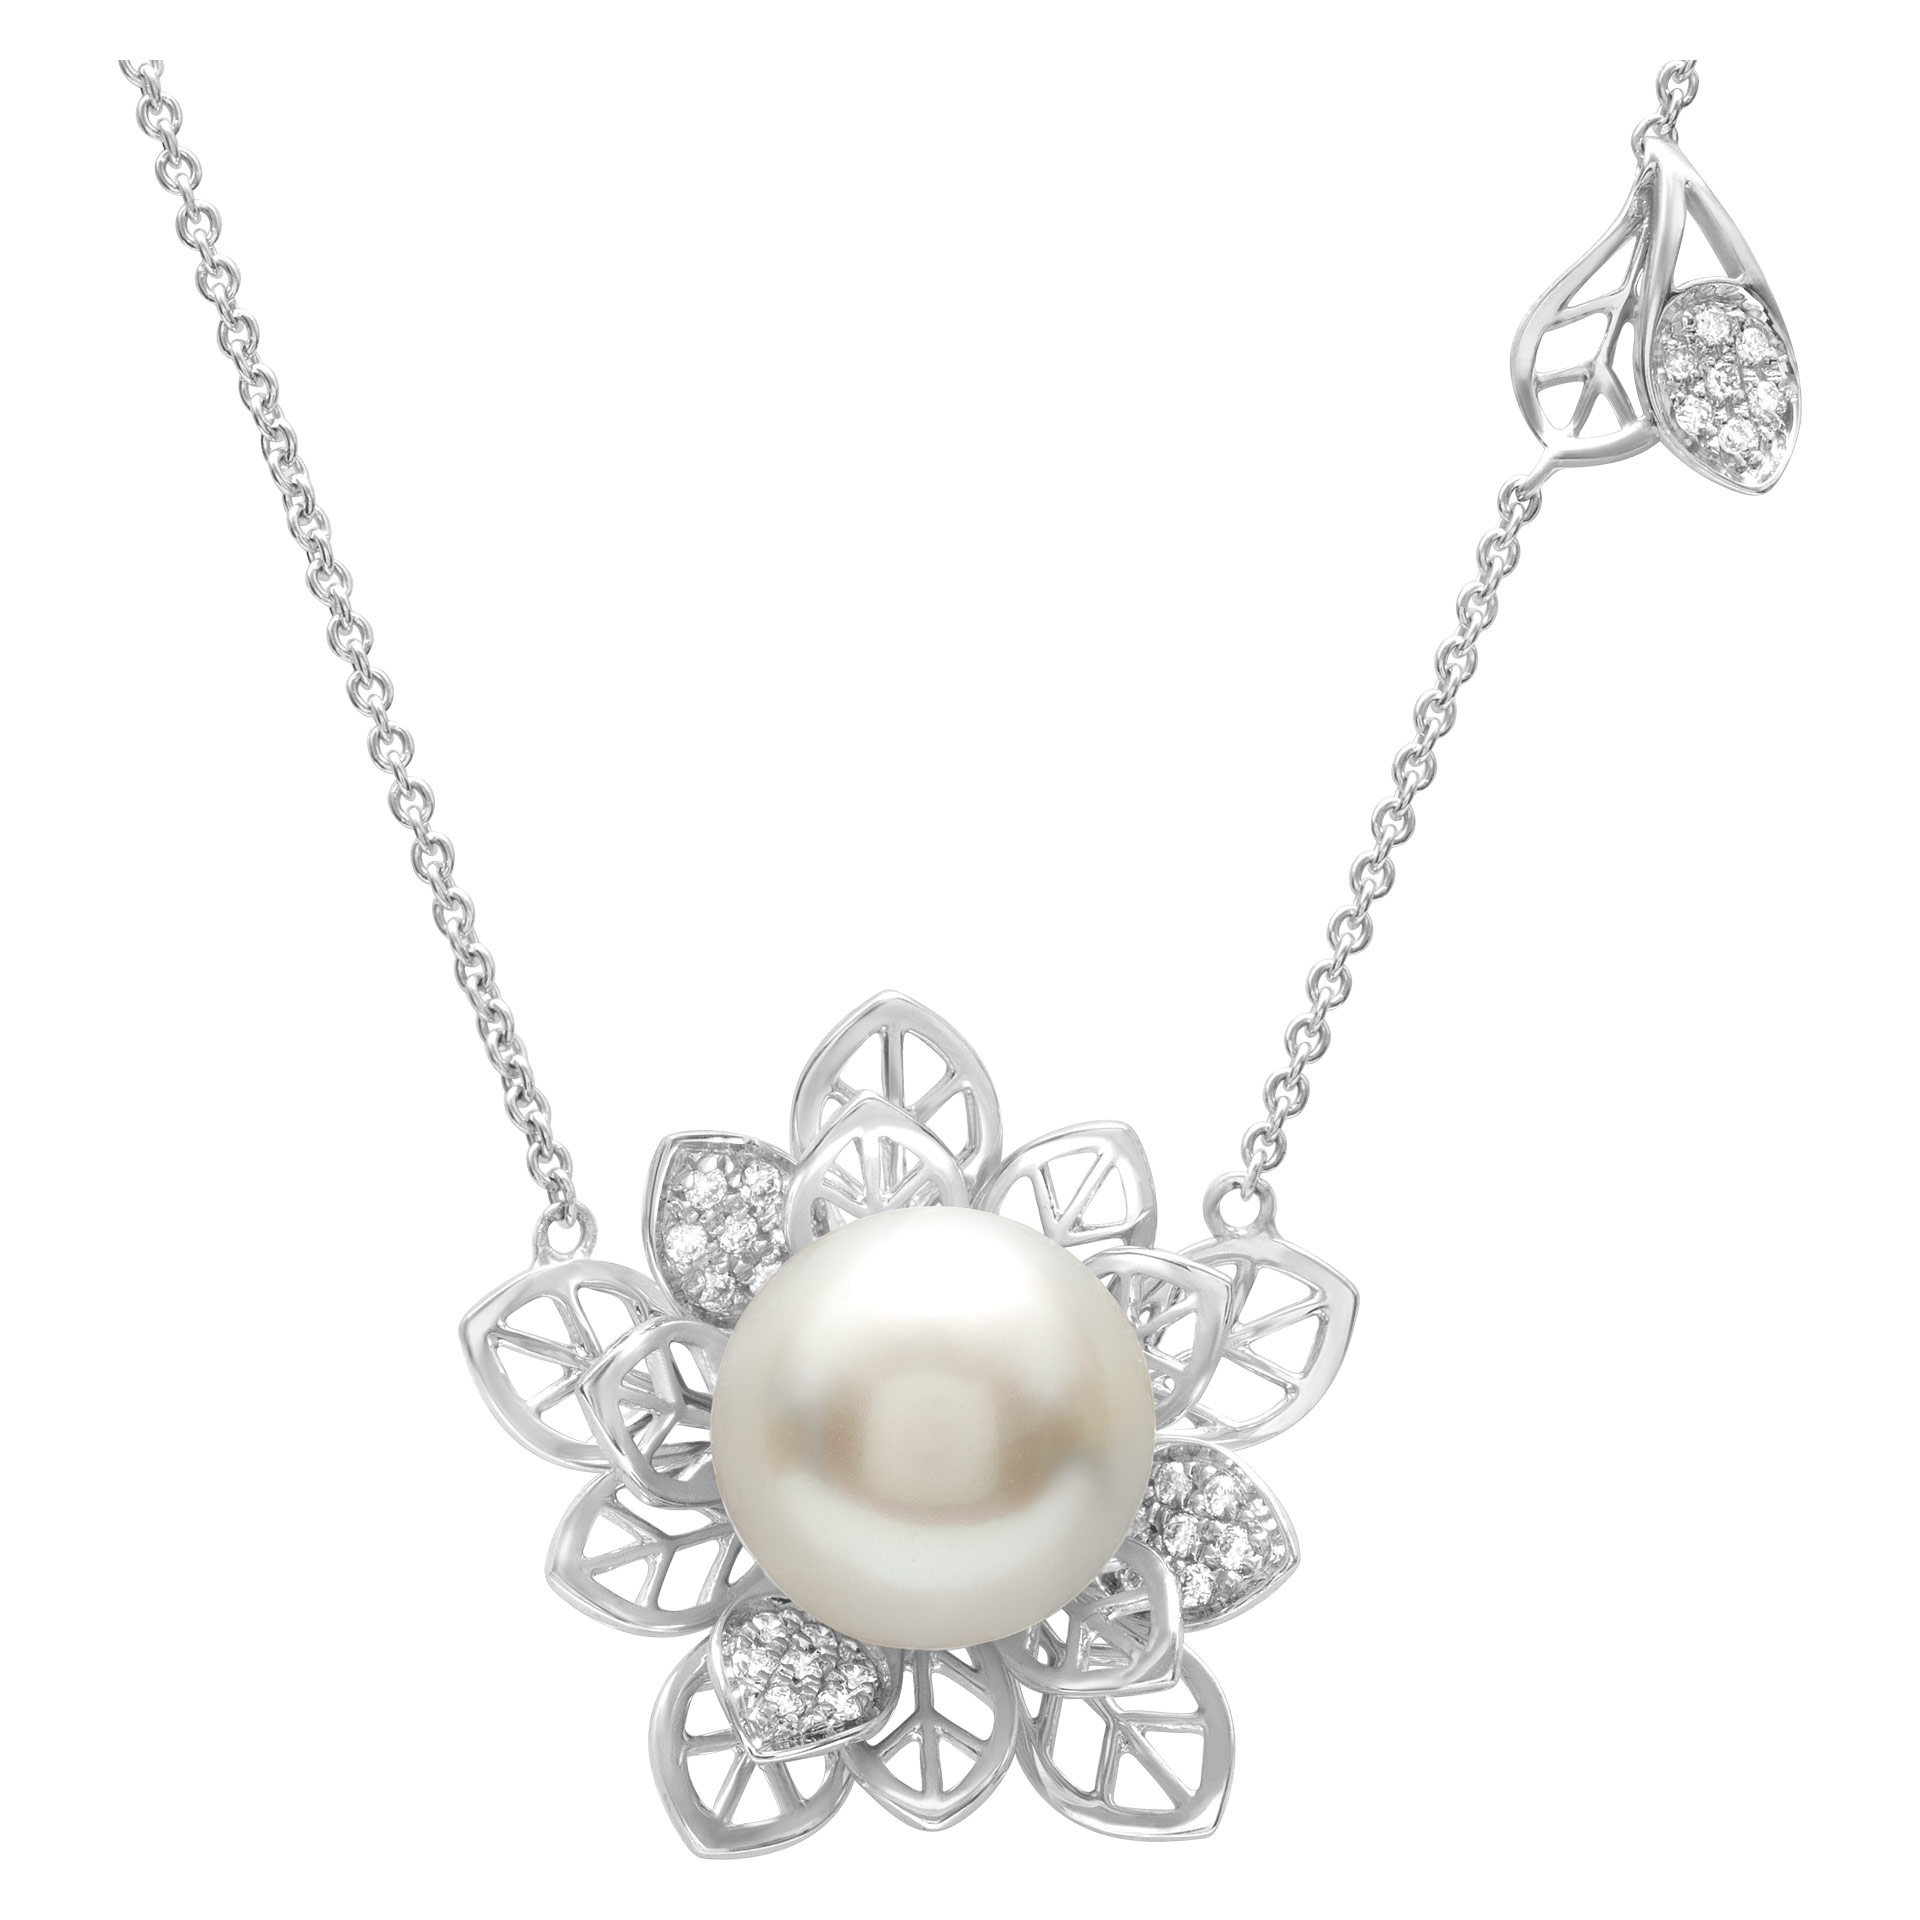 Flower style 12.3mm South Sea Pearl neacklace with diamond accents